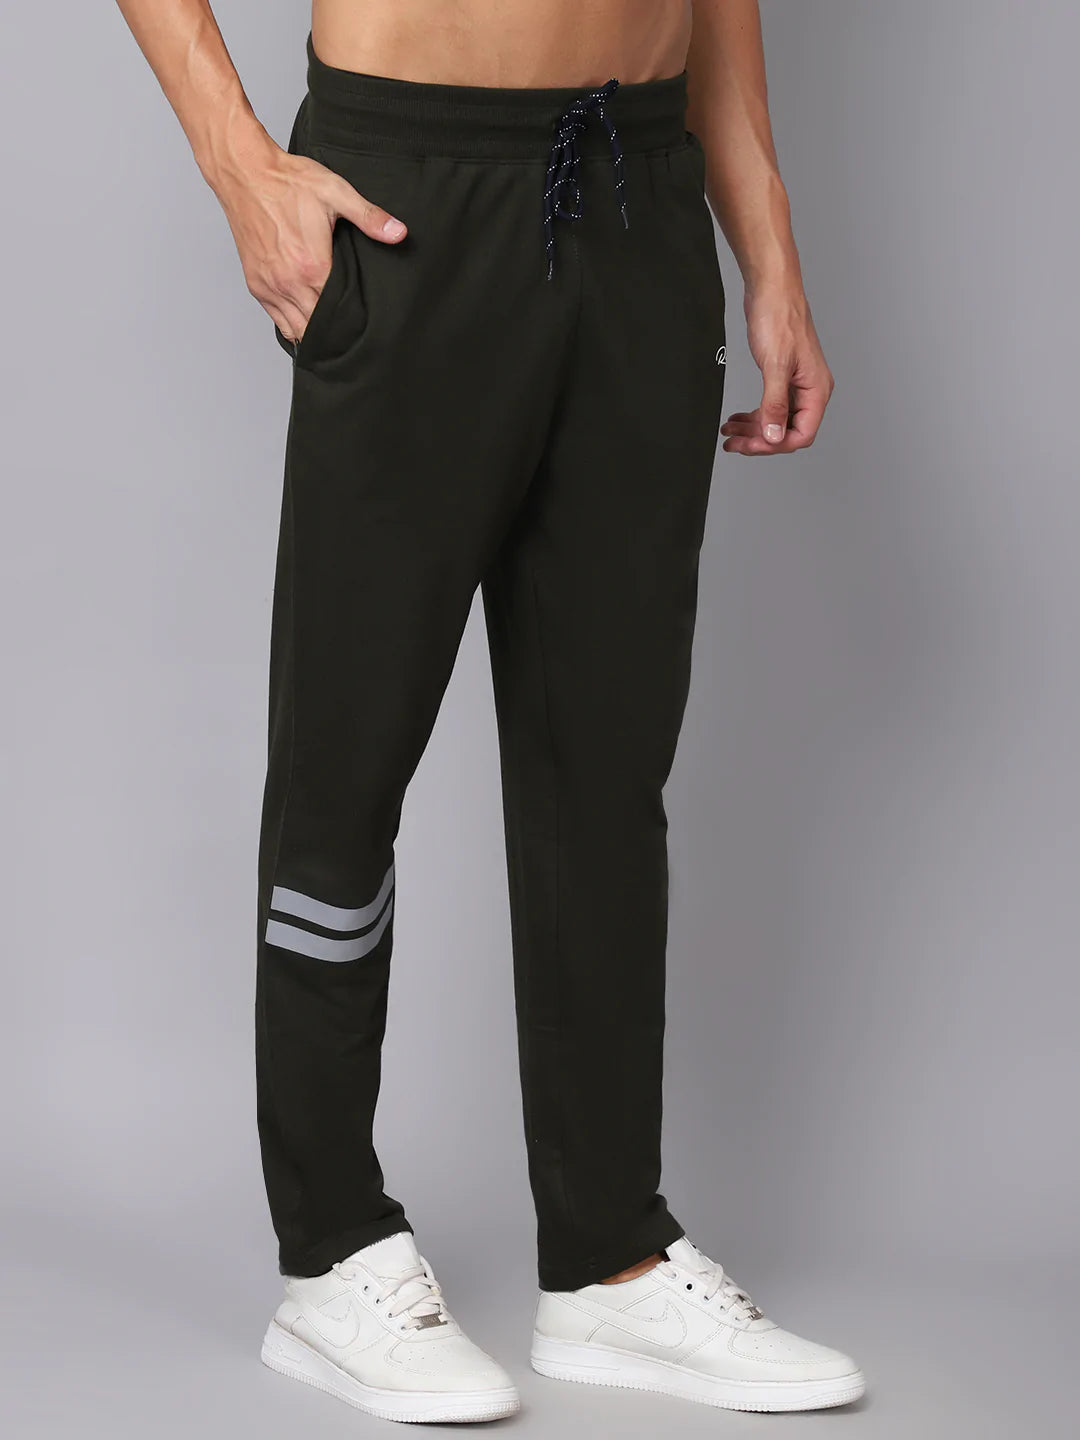 Buy Men's Navy BlueGrey Cotton Solid Slim Fit Track Pants Combo Online In  India At Discounted Prices